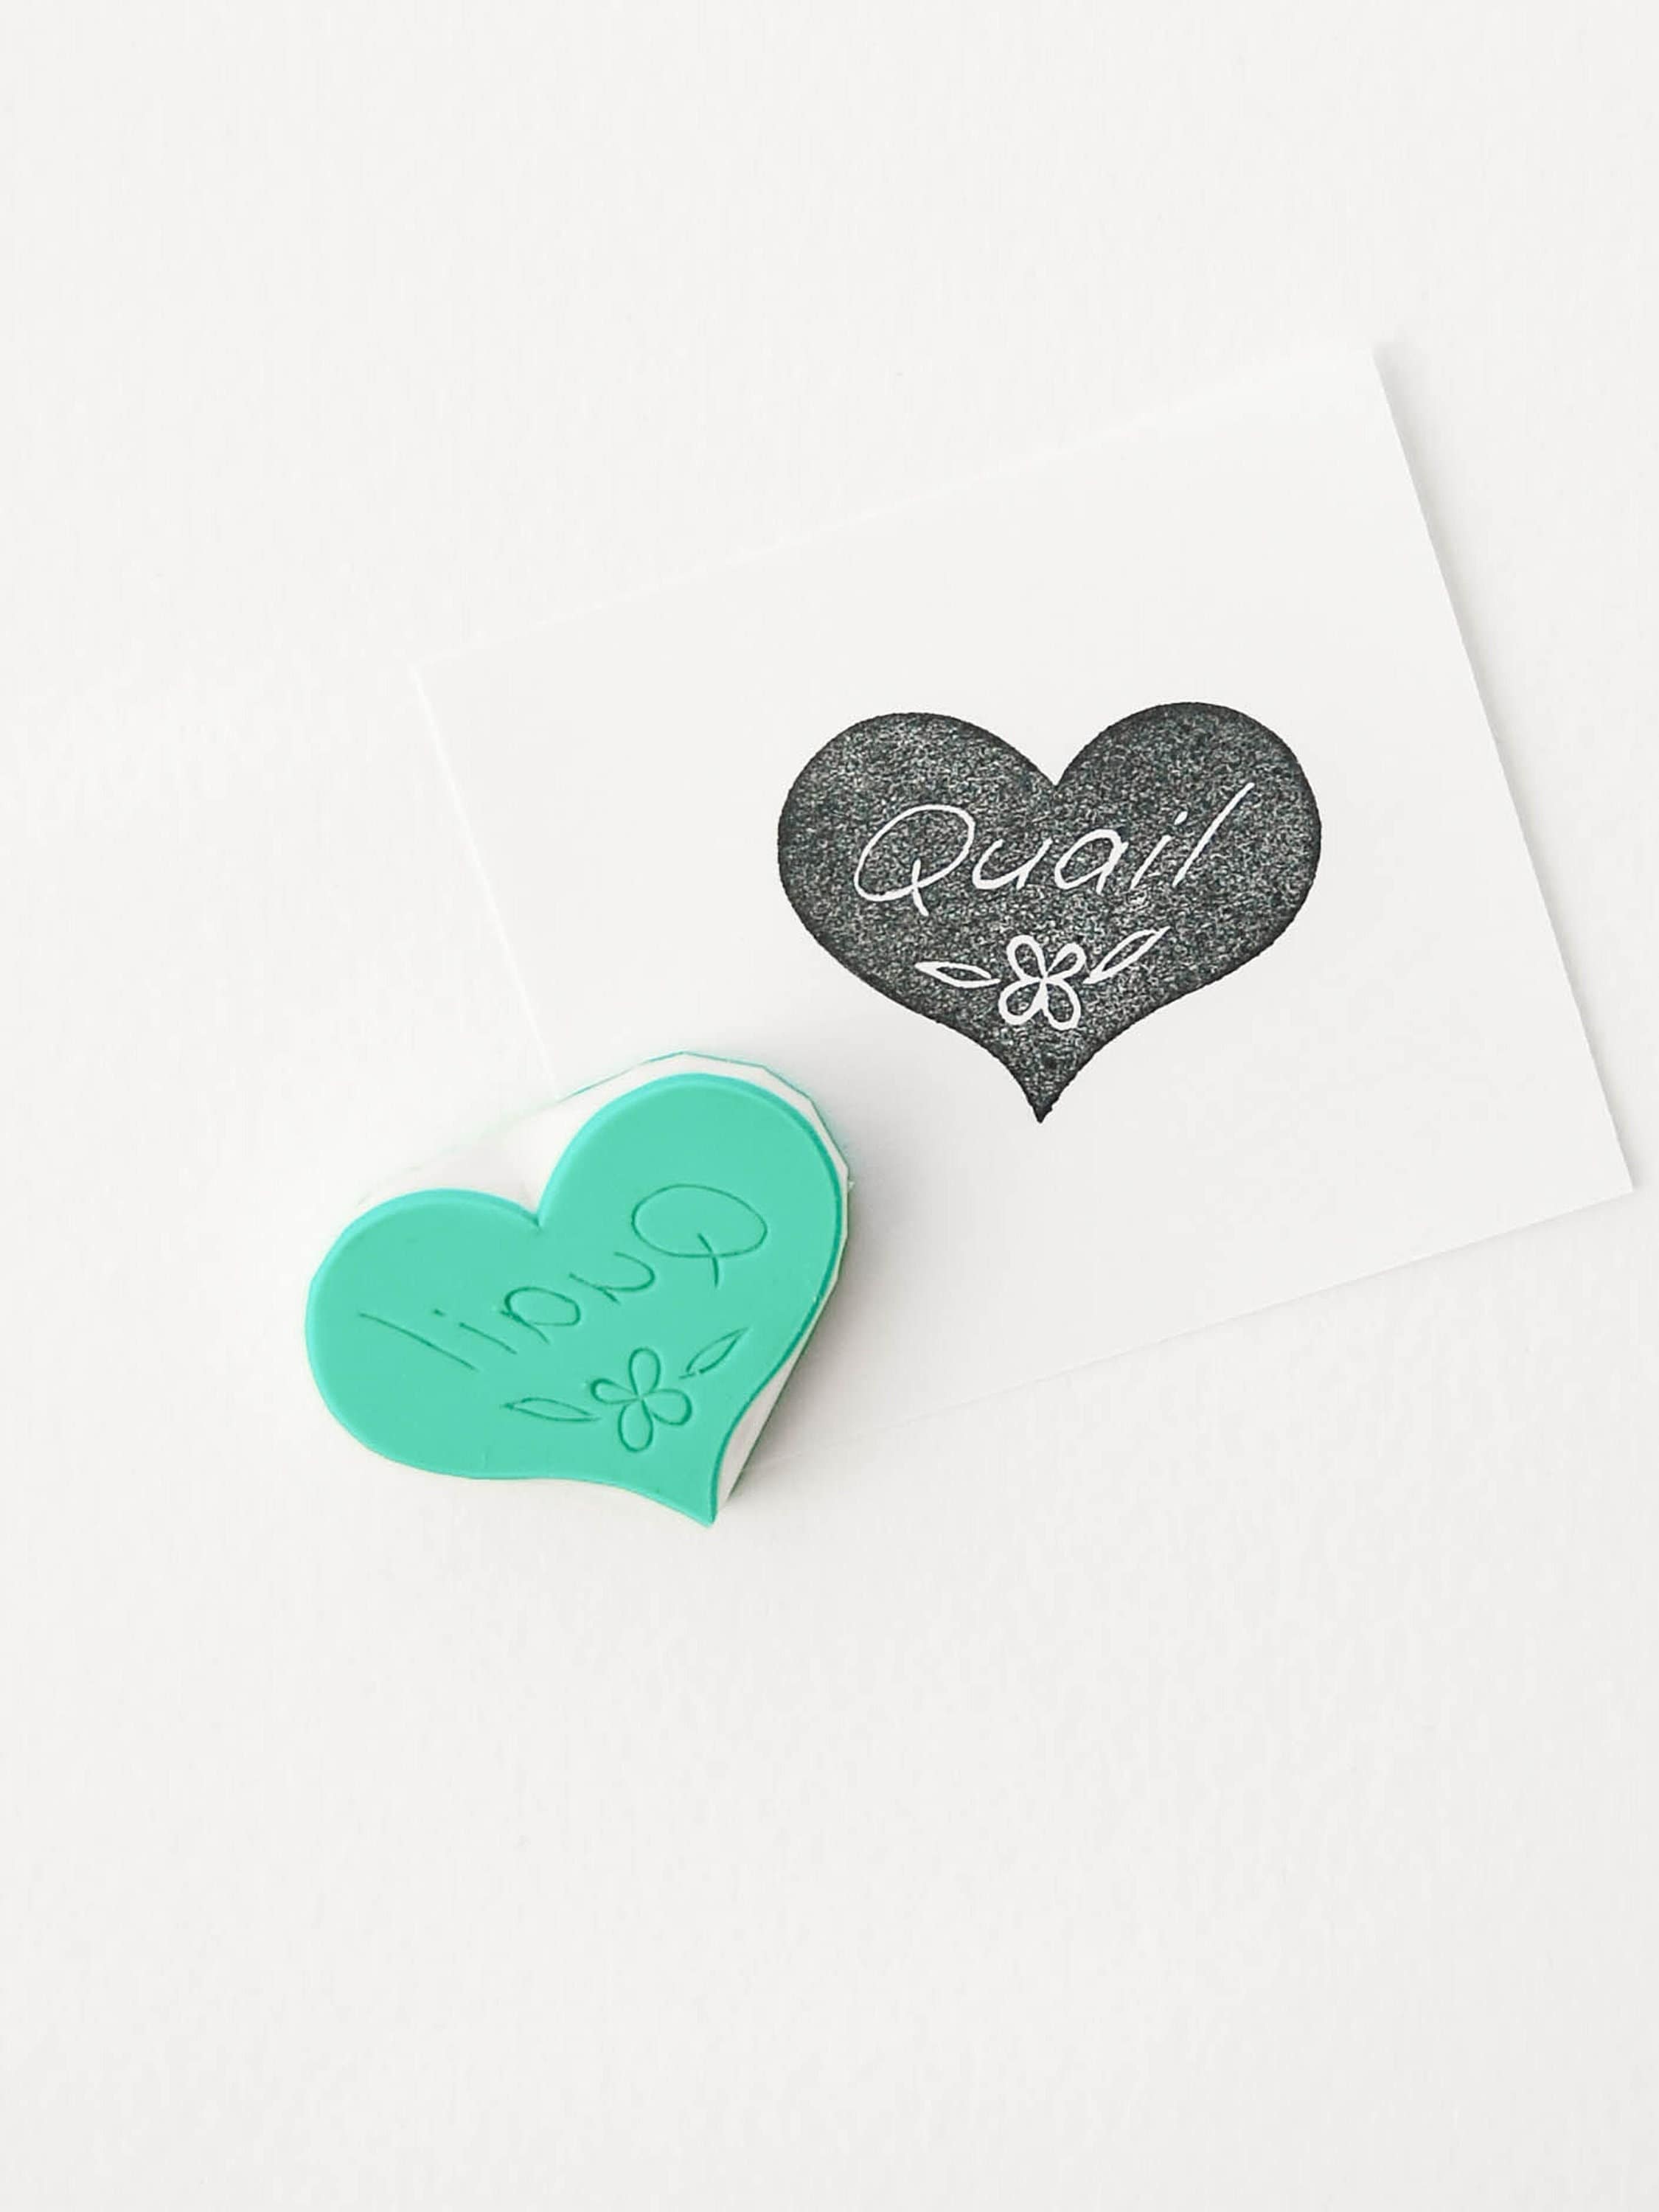 Abstract Heart Stamp, Valentine Love Rubber Stamp, Tribal Heart Rose Stamp